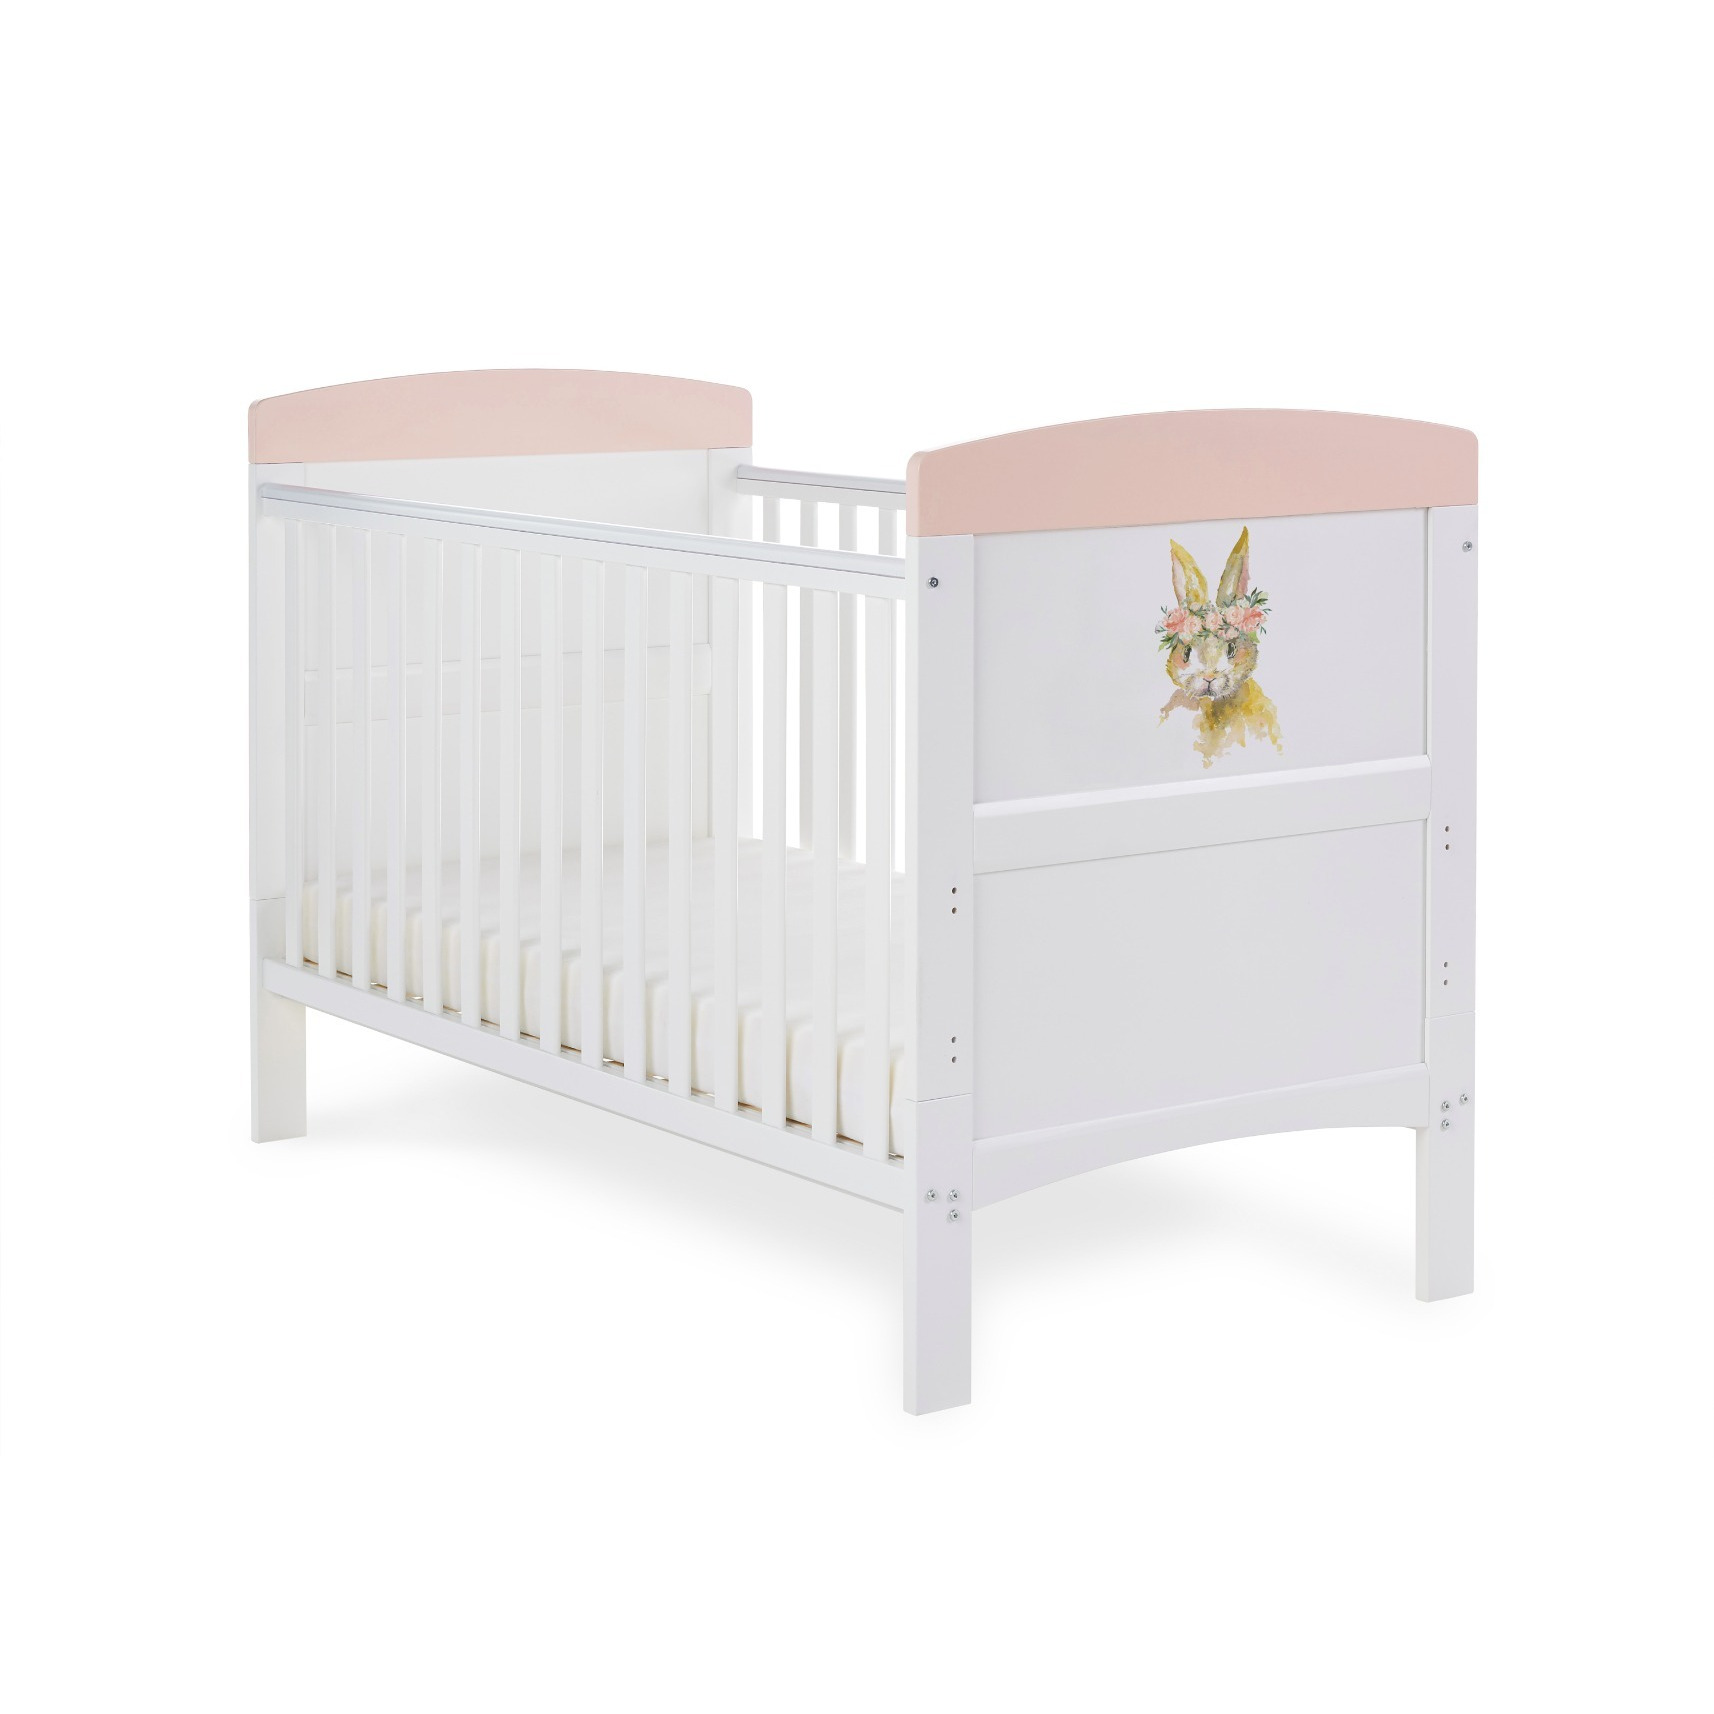 Obaby Grace Inspire Cot Bed - Watercolour Rabbit Pink - image 1